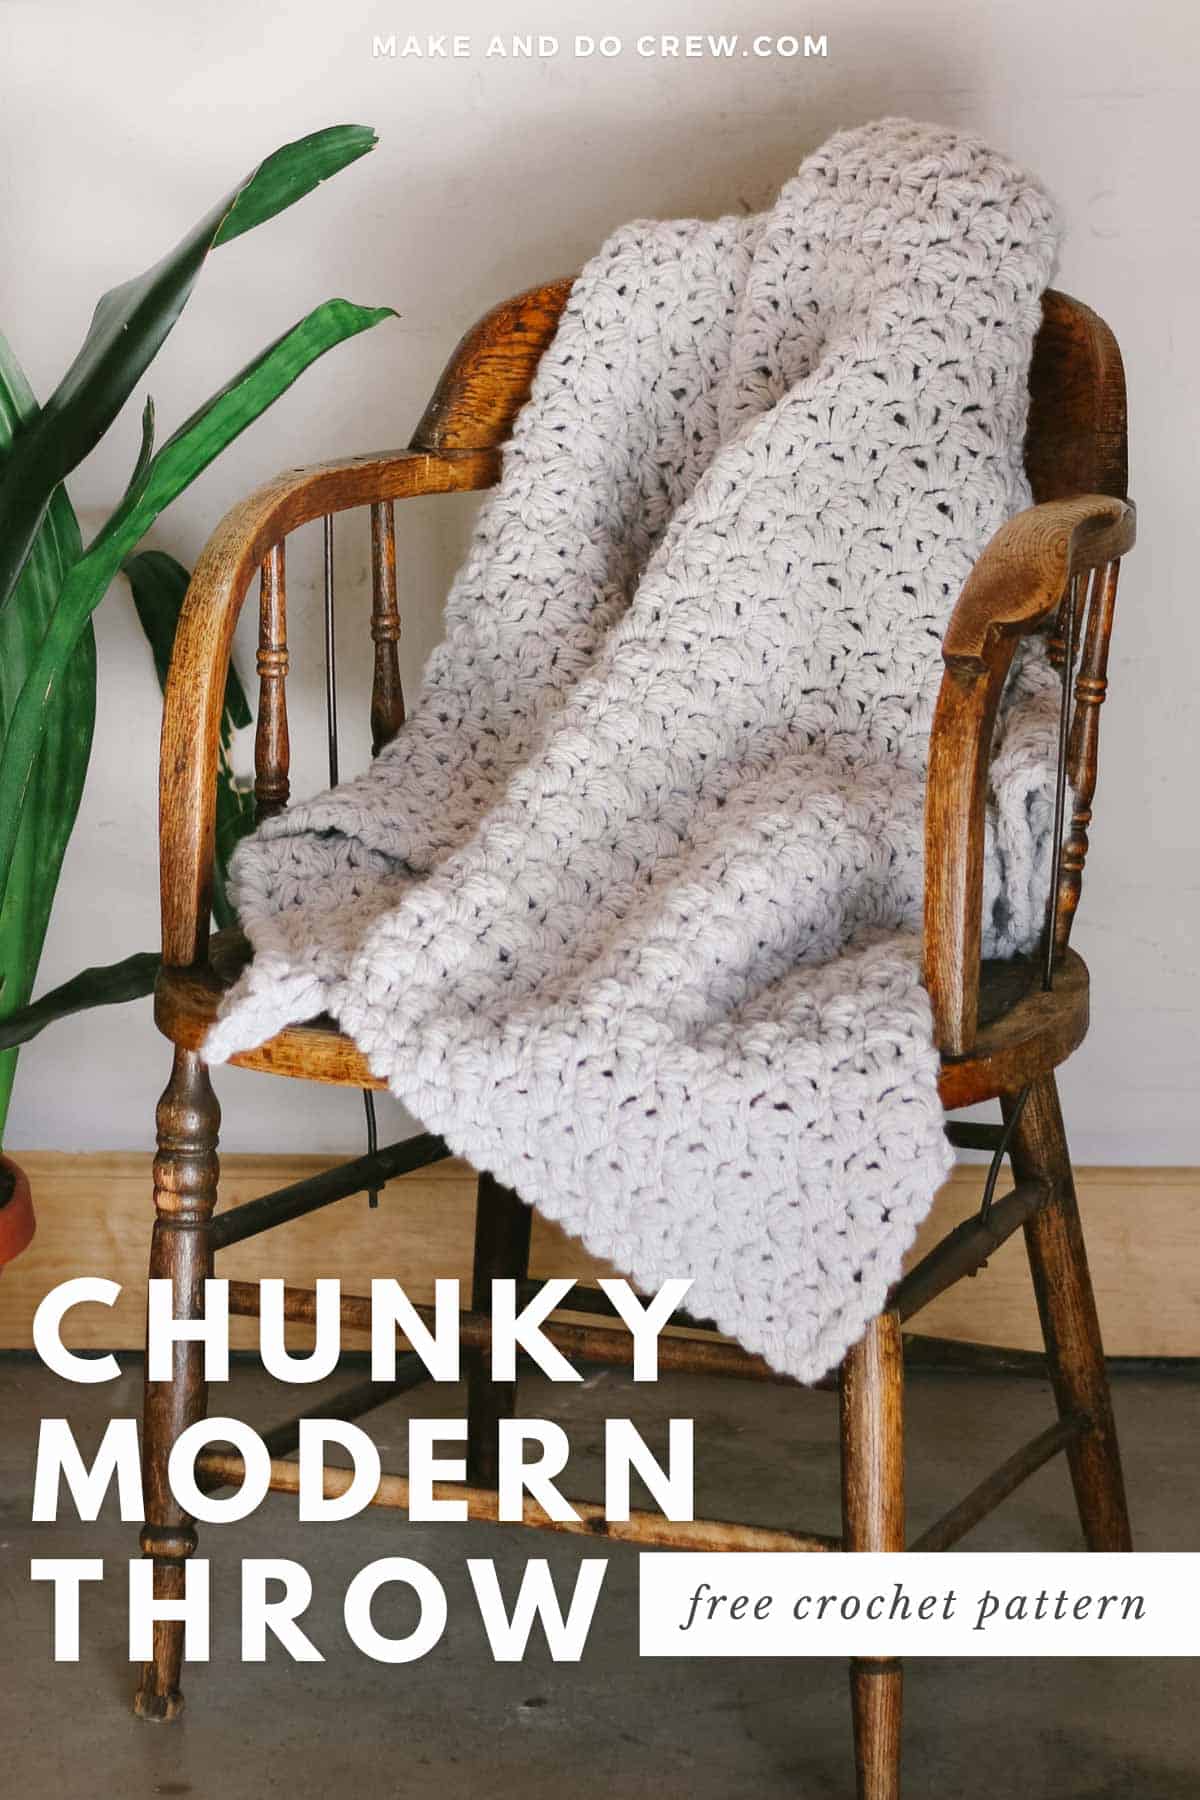 A chunky crochet throw blanket draped on a wooden chair.